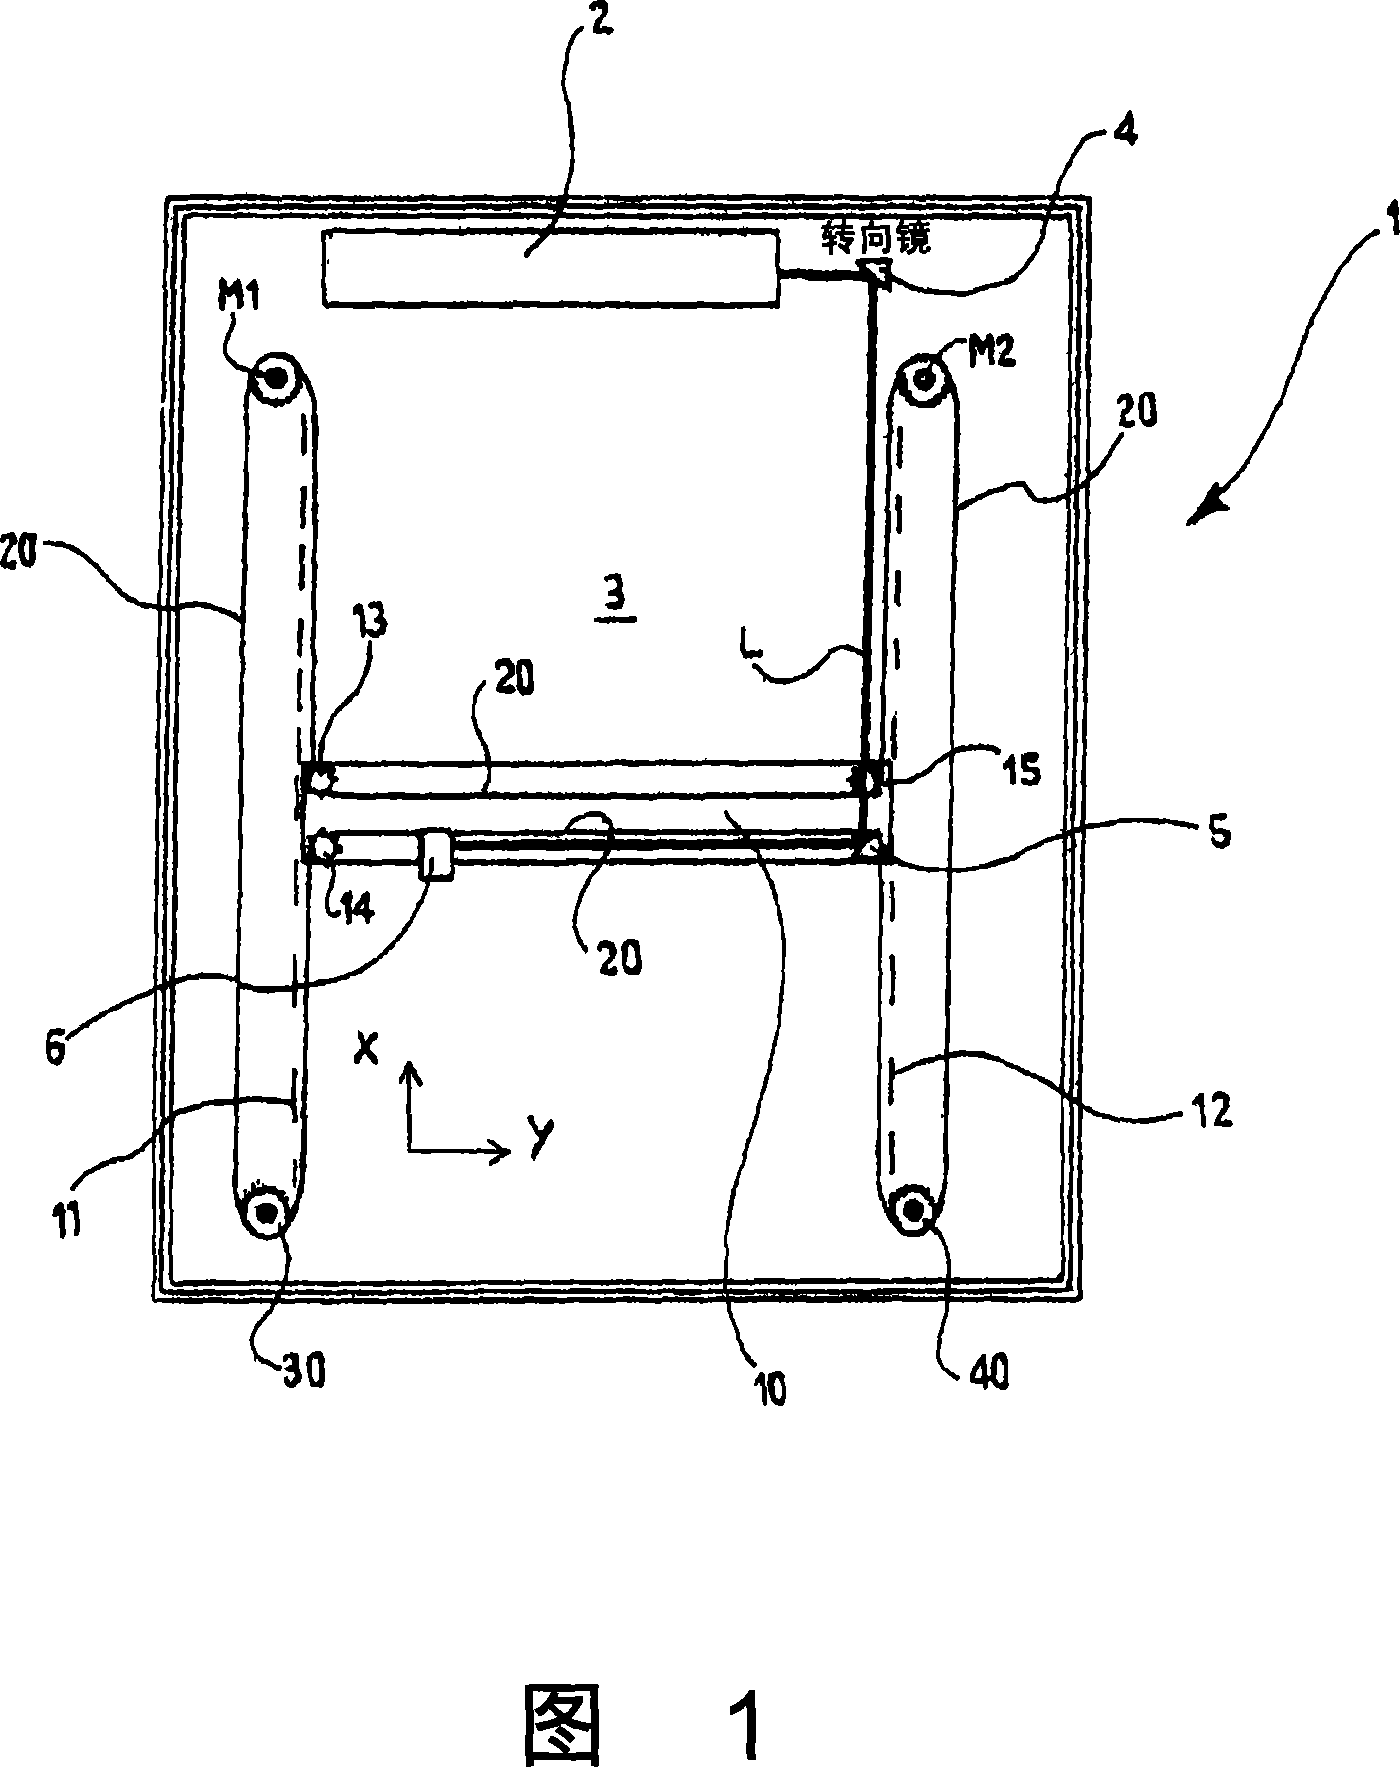 Apparatus for laser cutting and/or marking